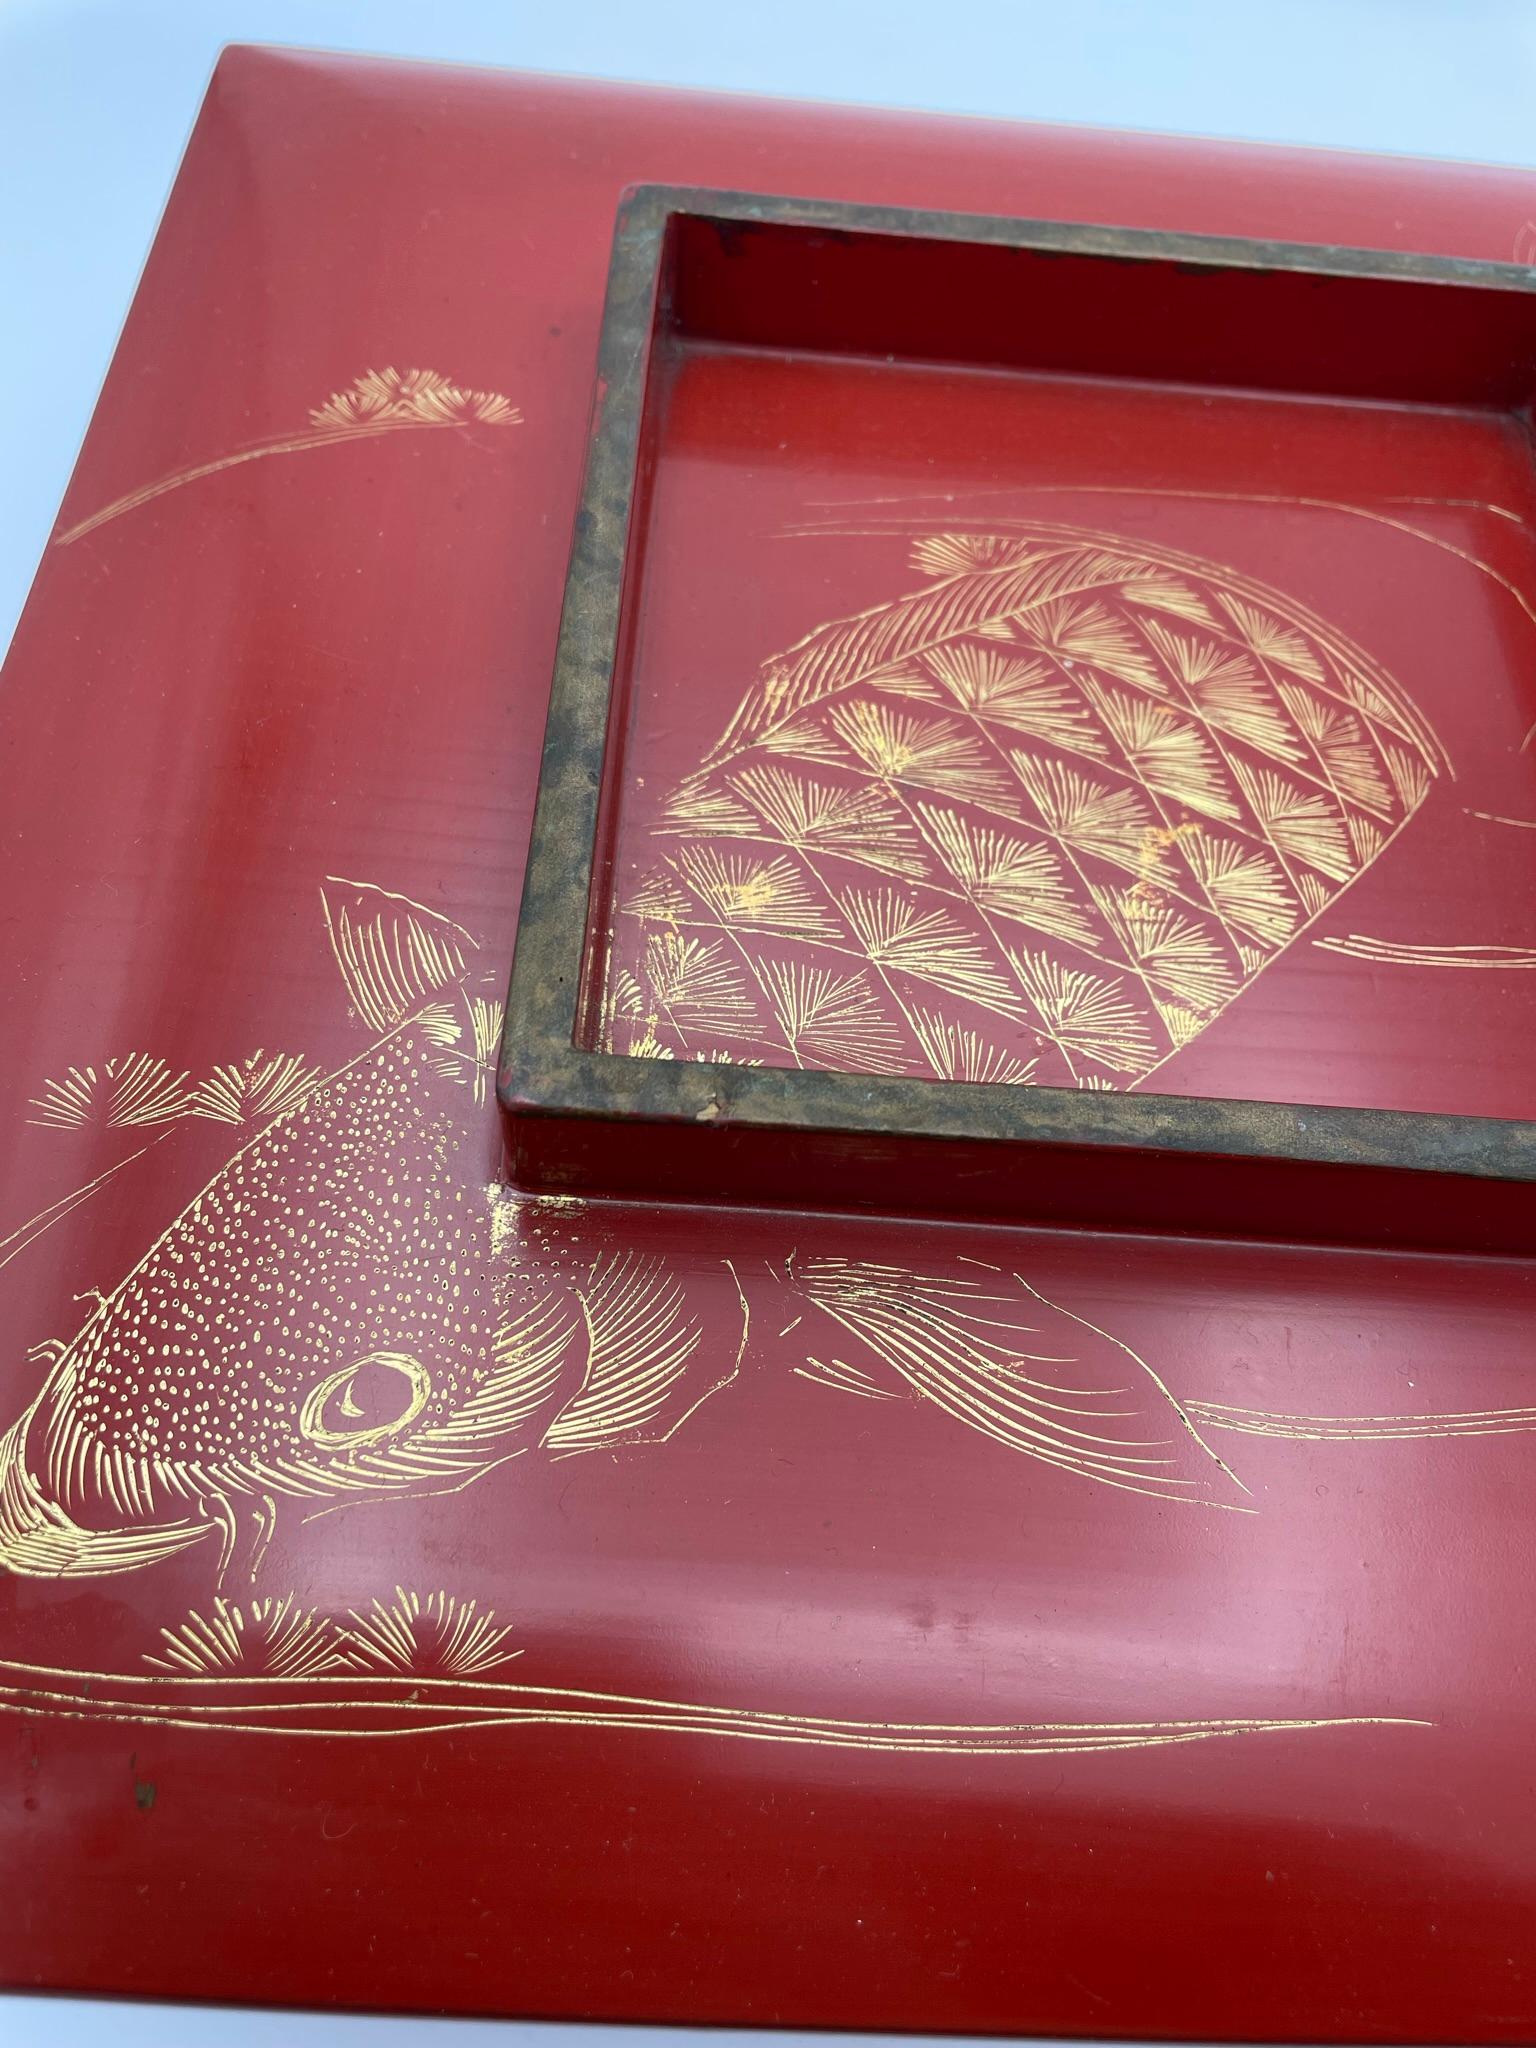 Mid-20th Century Antique Japanese Lacquer Box with a Koi Fish 1950-1970s